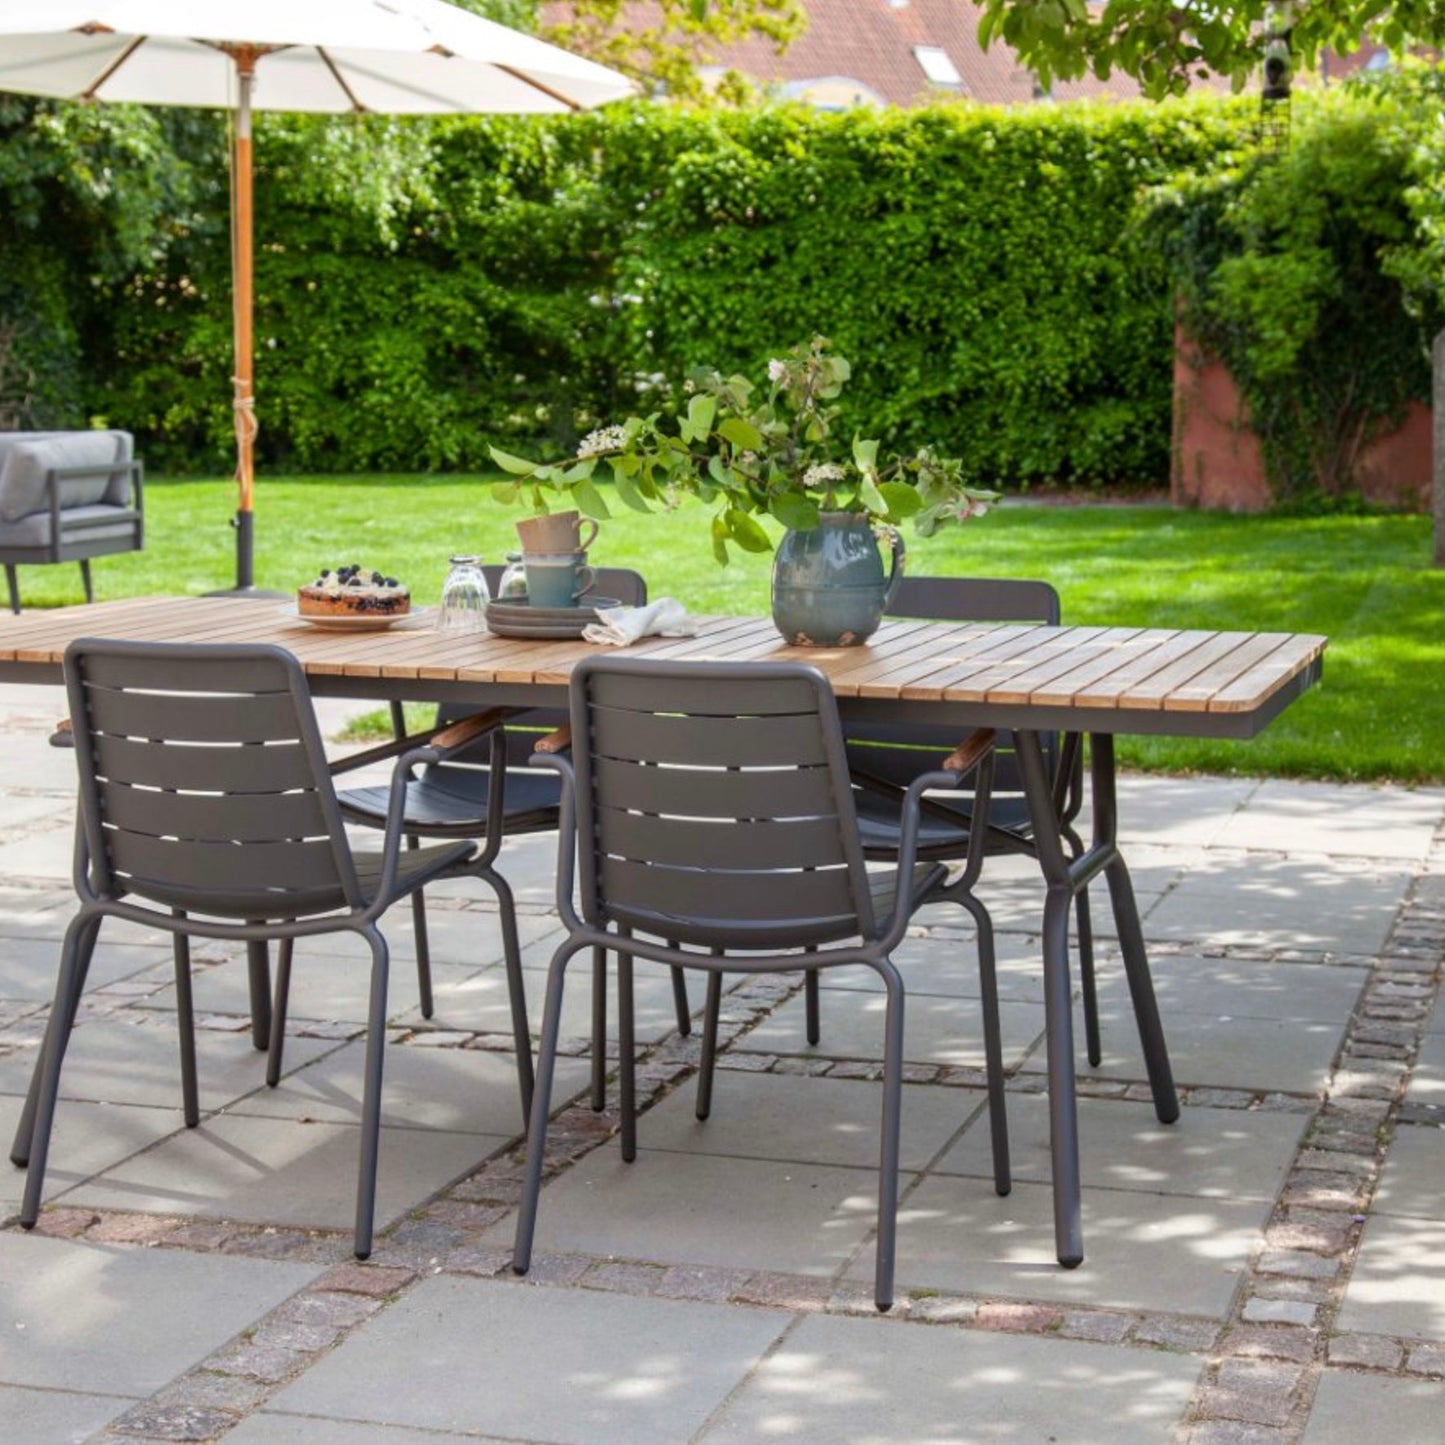 'Parc' garden furniture set: rectangular table and 4 chairs